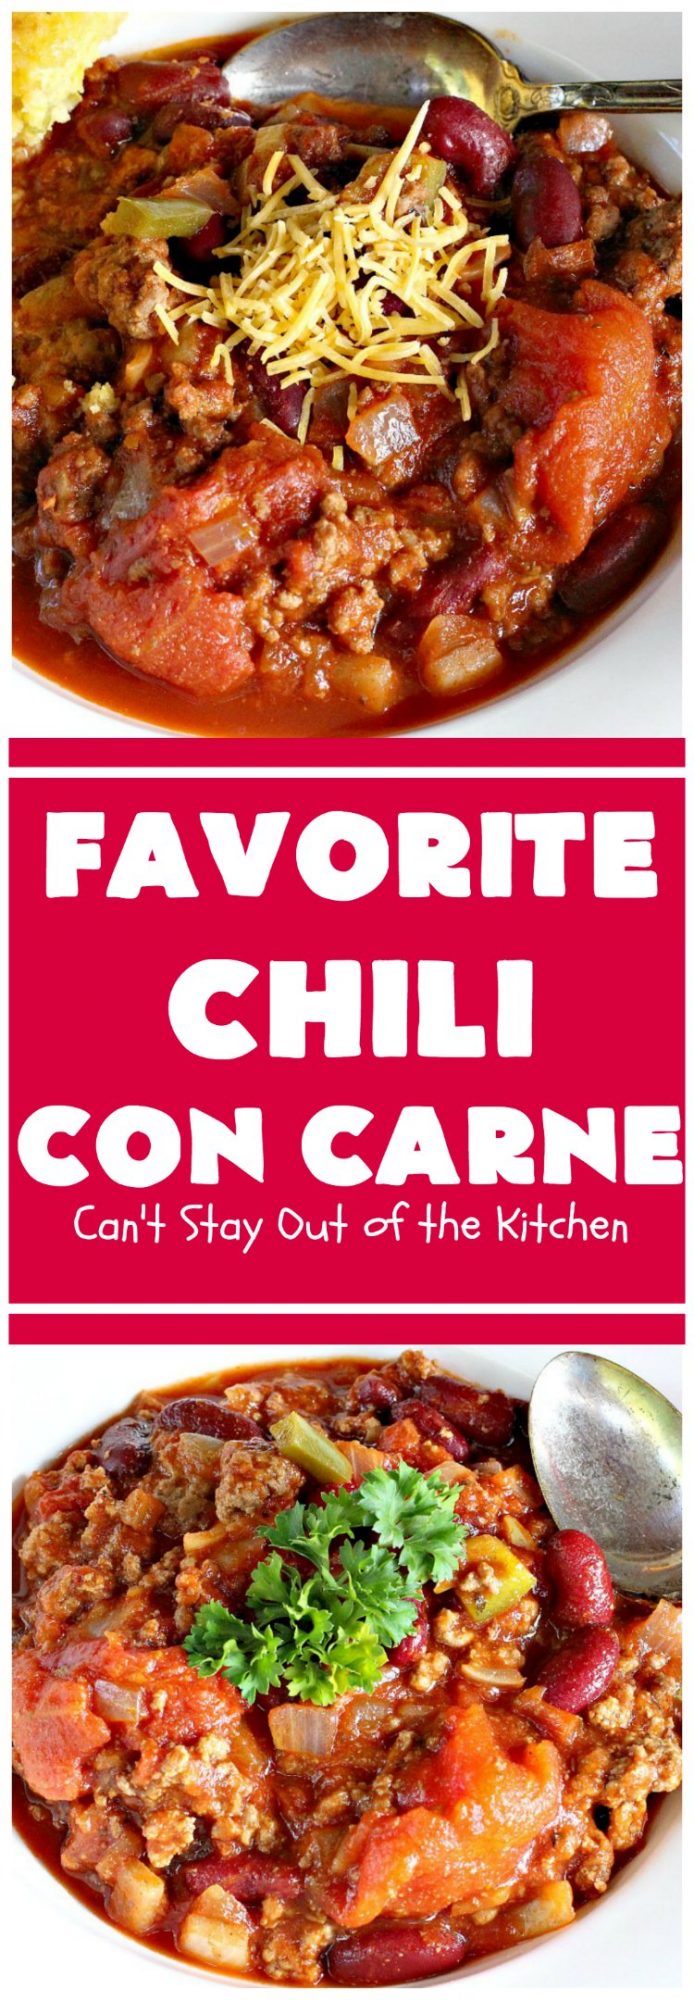 Chili Con Carne – Can't Stay Out of the Kitchen